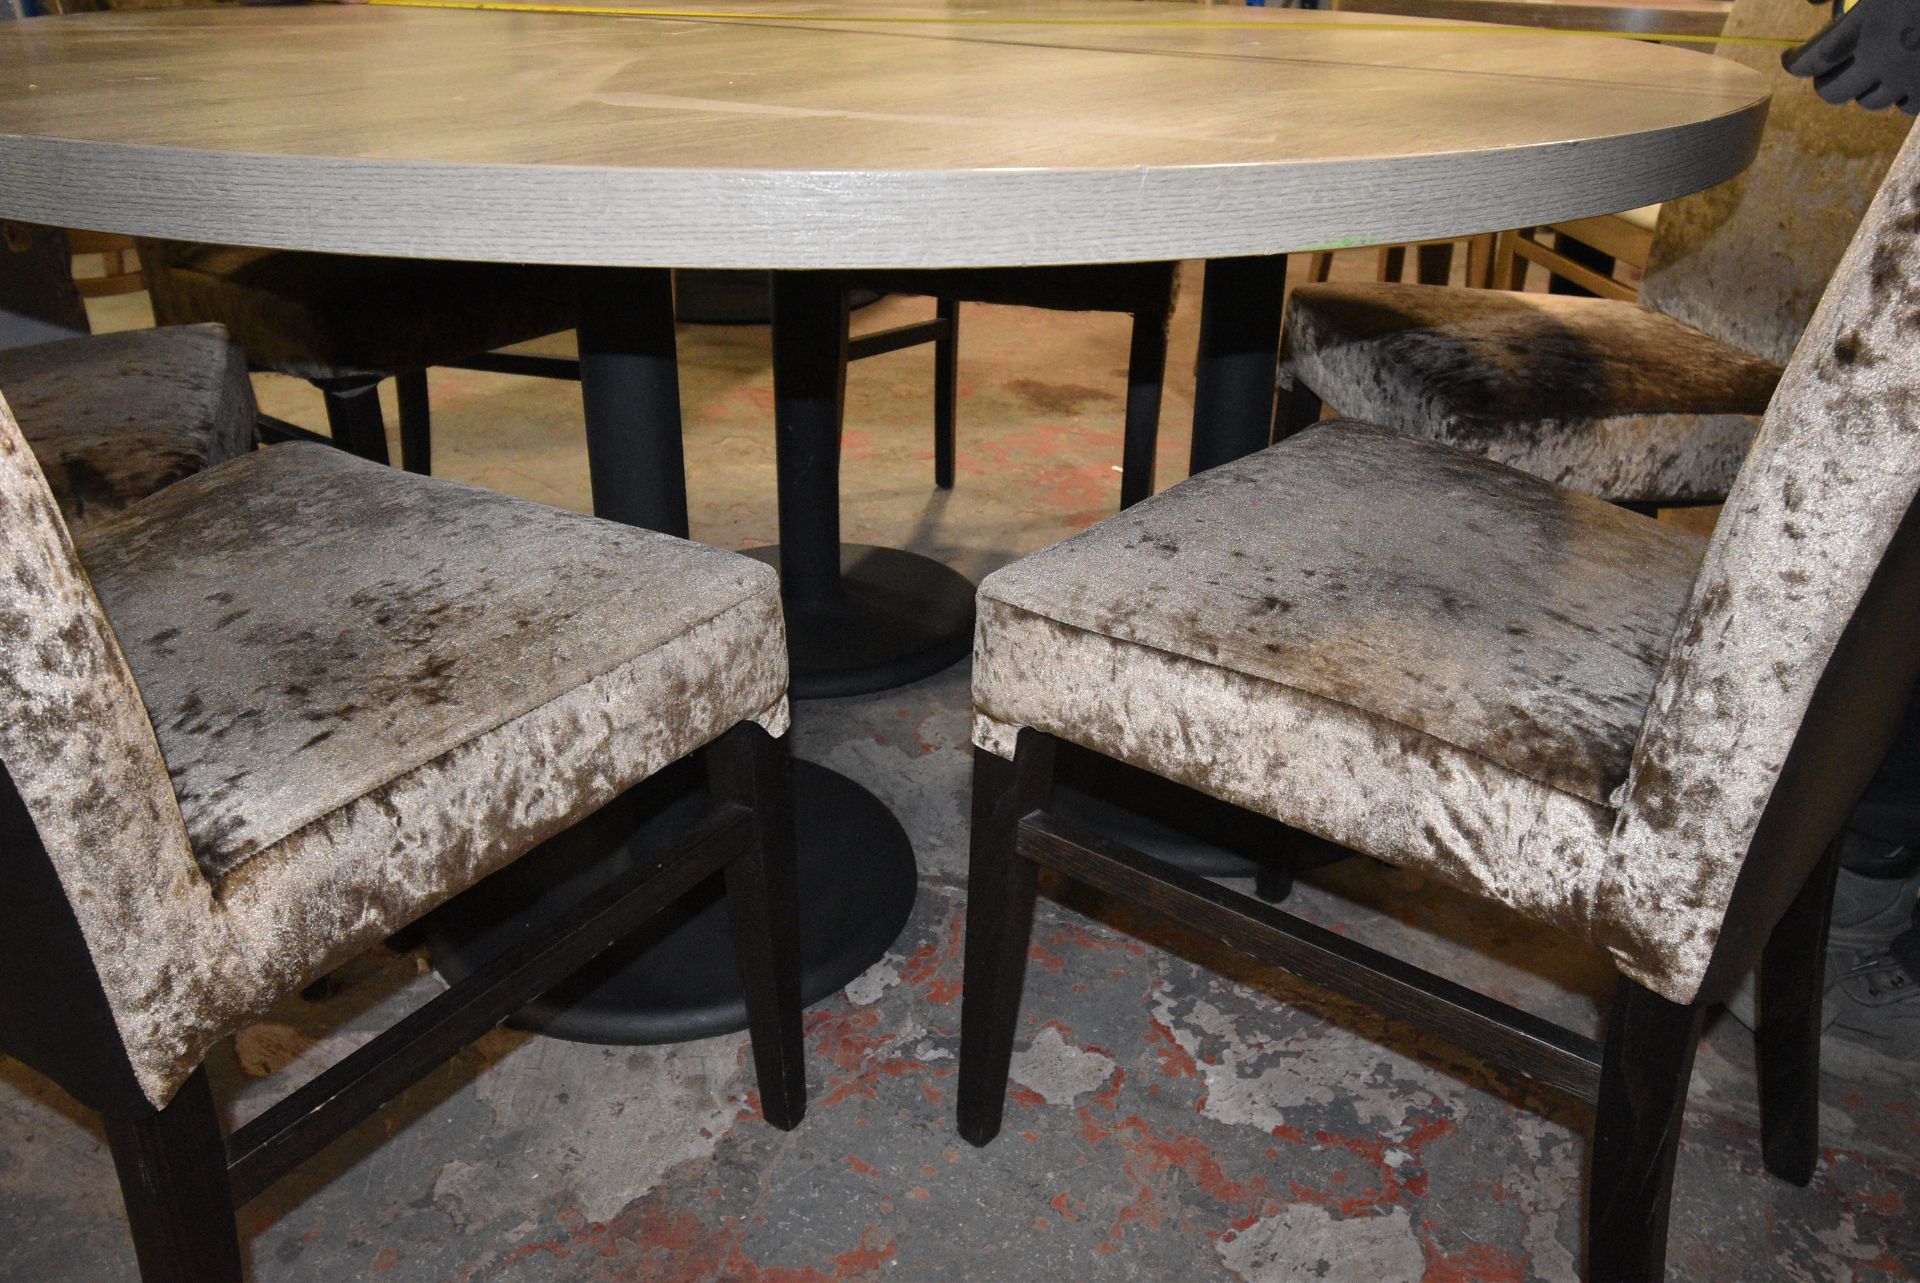 150cm Circular Triple Pedestal Table with Six Chairs - Image 2 of 2